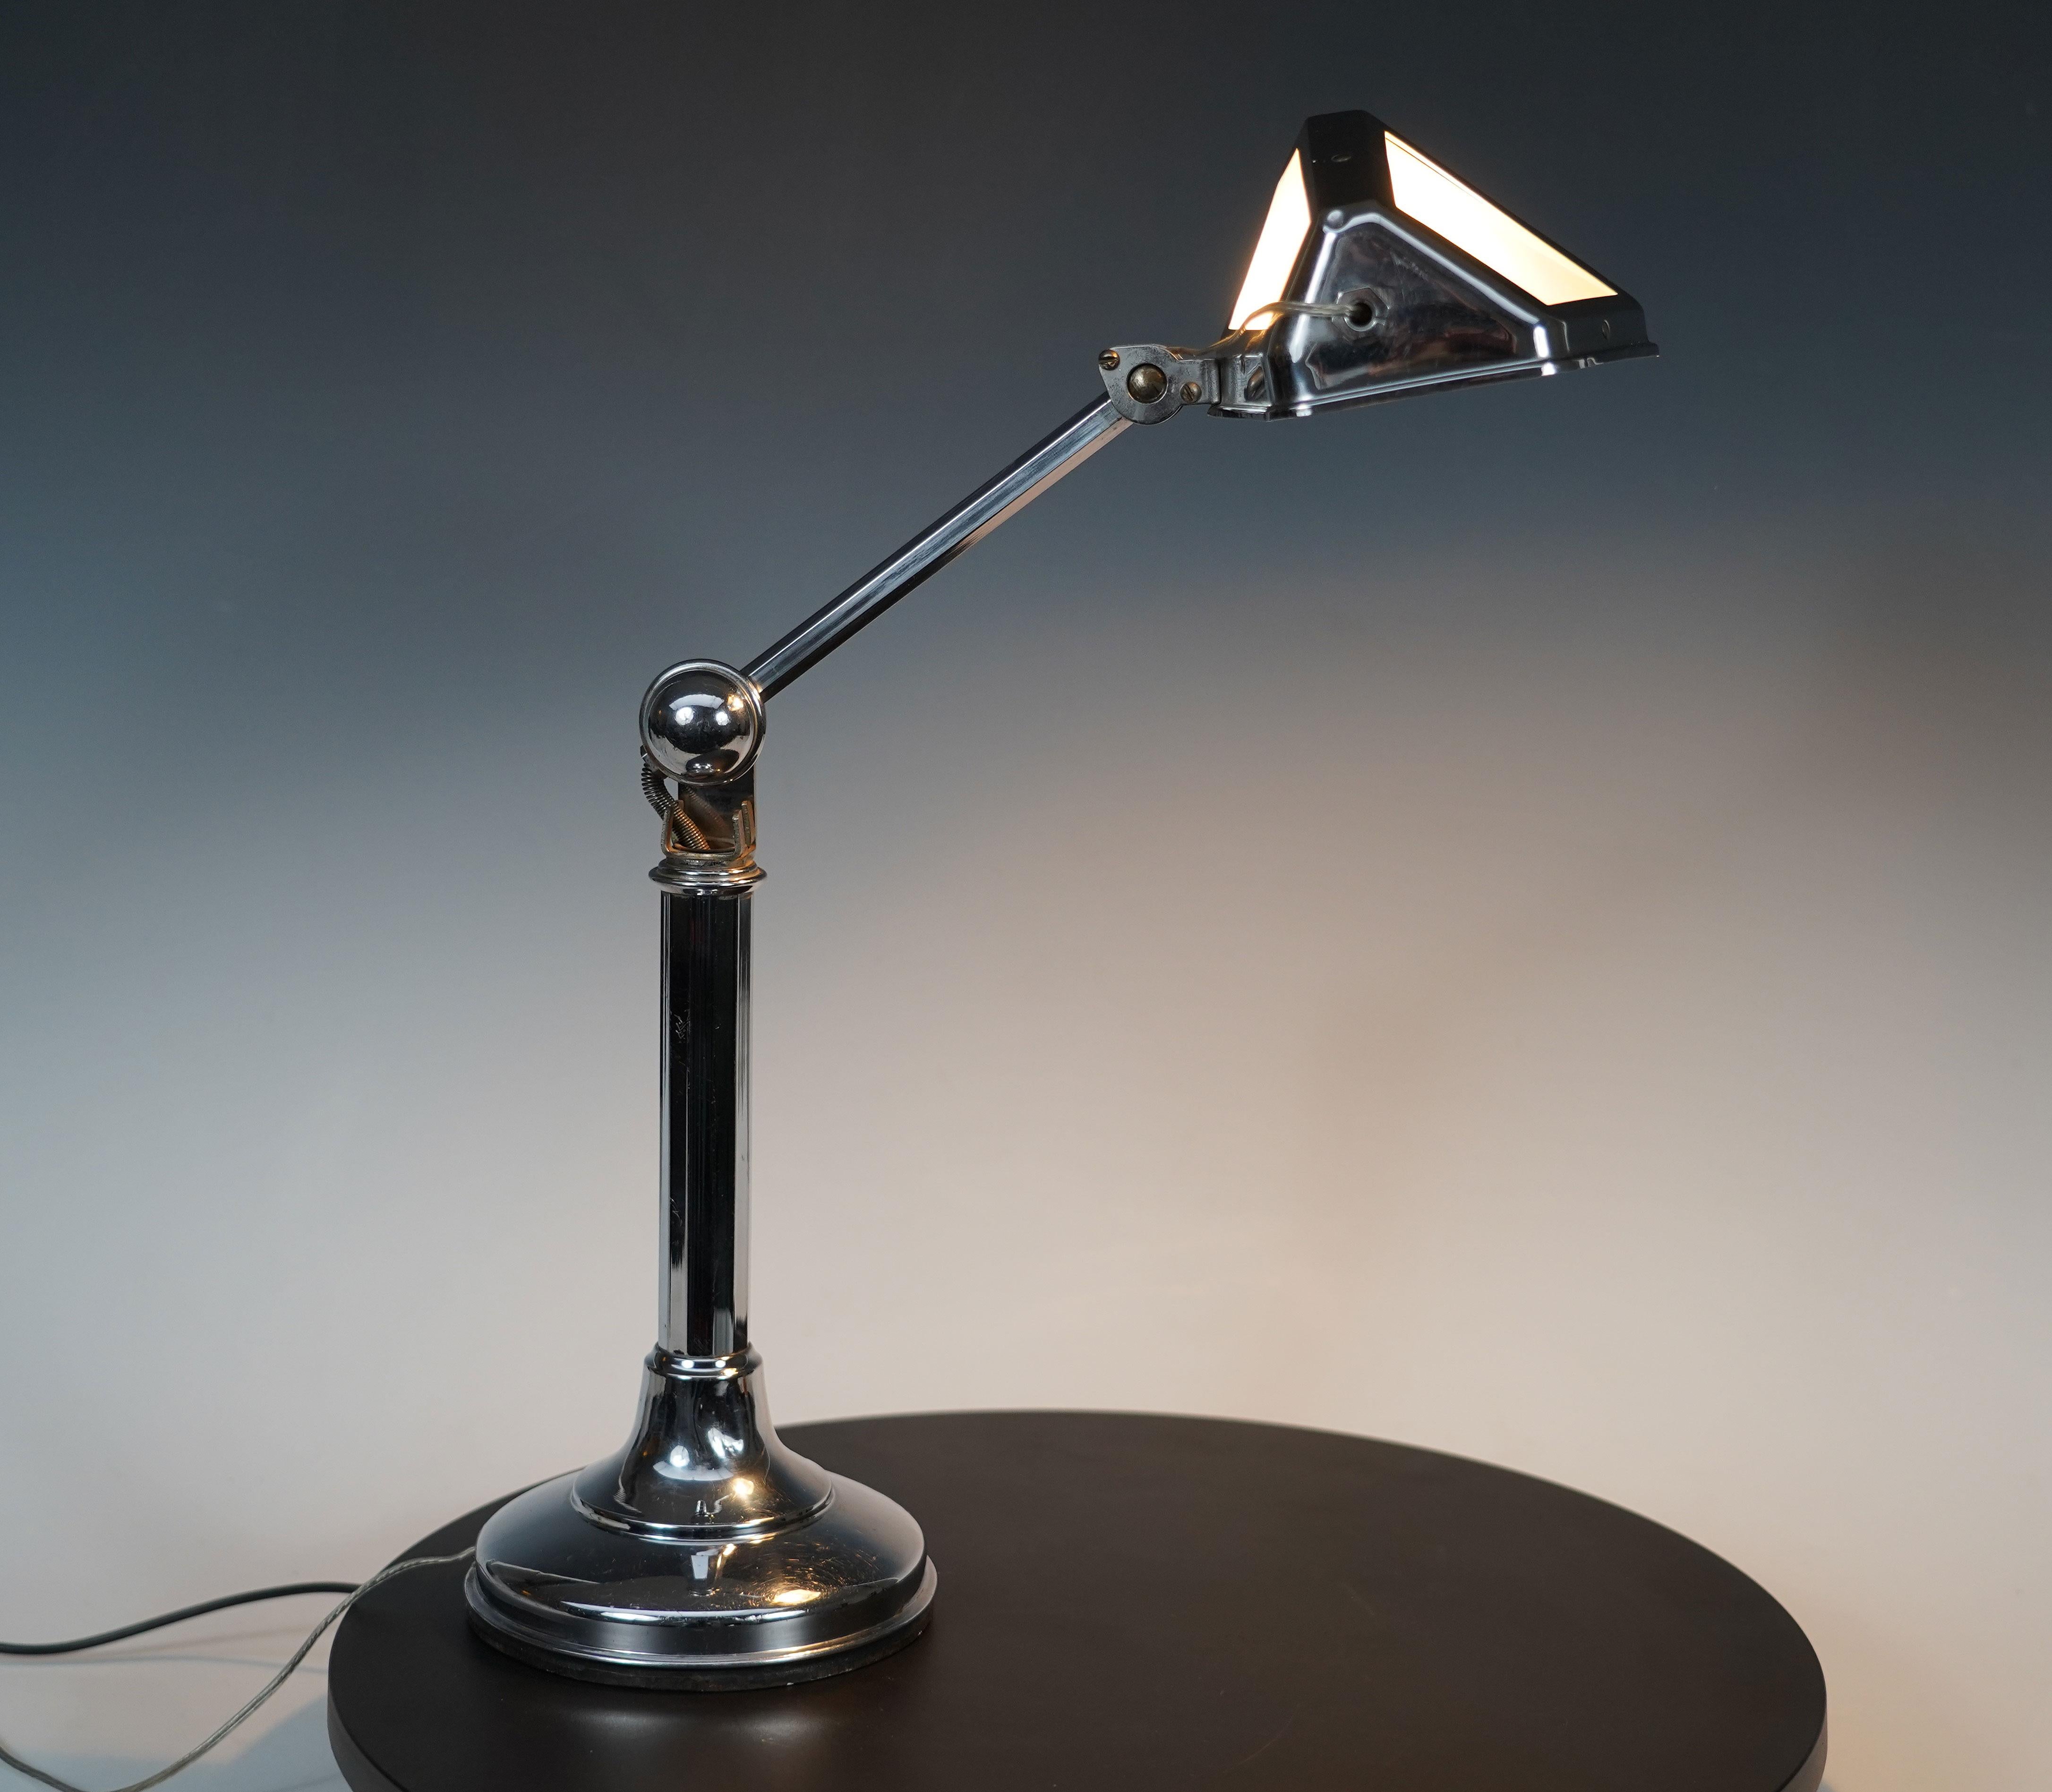 Chromed brass desk lamp. Composed of a faceted shaft resting on a circular base, it has the particularity of having a tilting and adjustable arm, ending in a shade with sandblasted glass windows.

Pirouett Lamp :
The Pirouett lamp is a range of